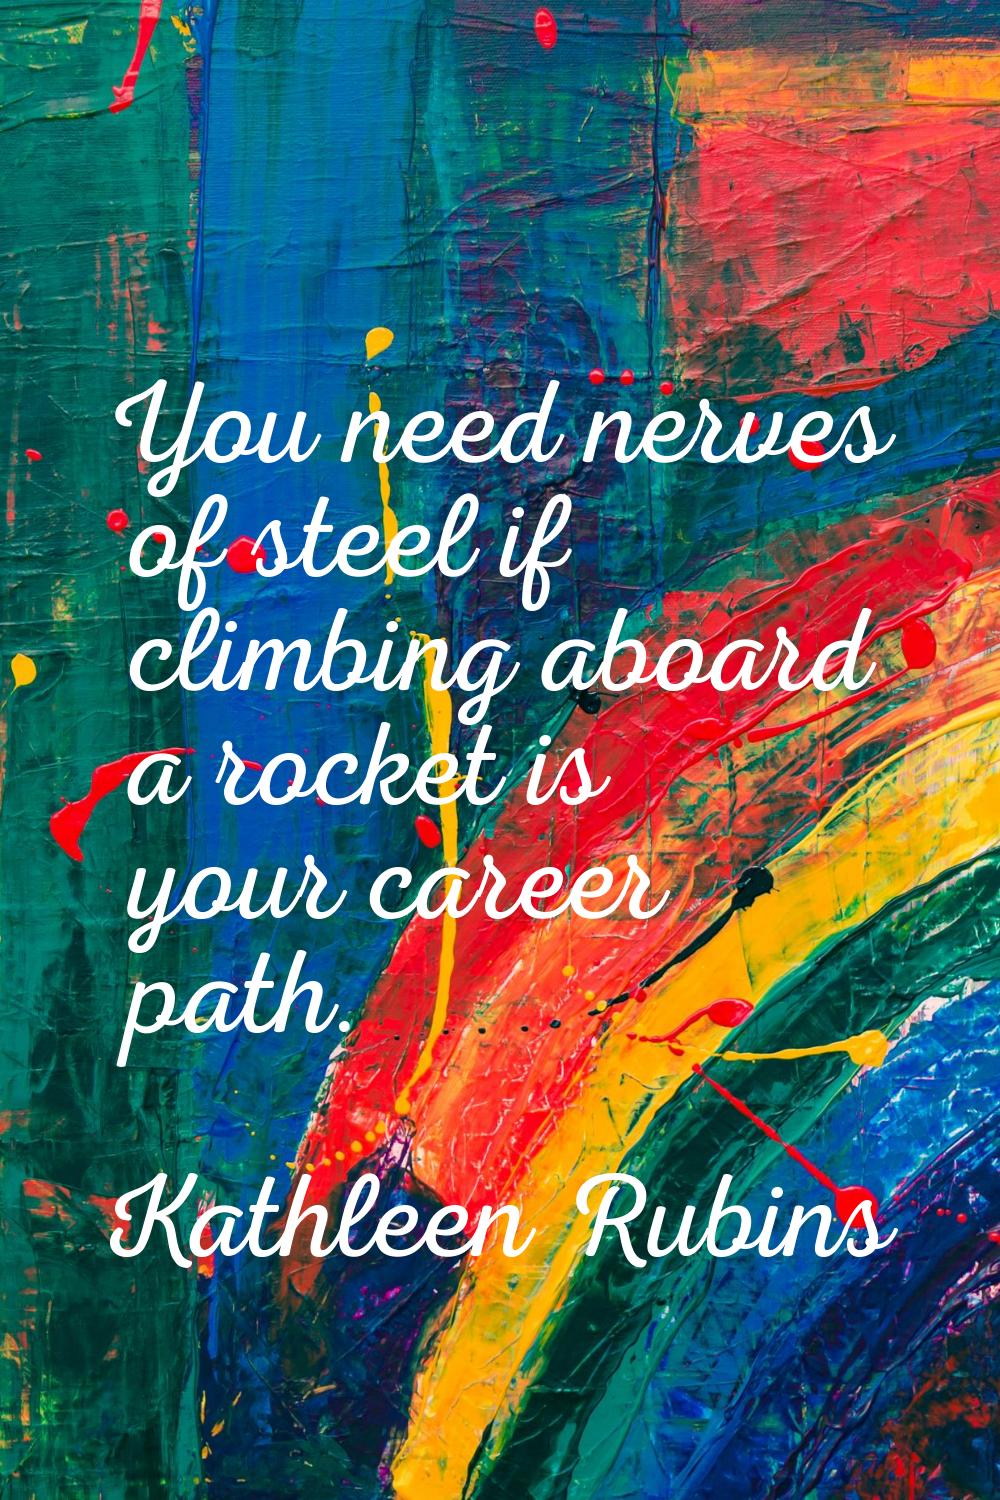 You need nerves of steel if climbing aboard a rocket is your career path.